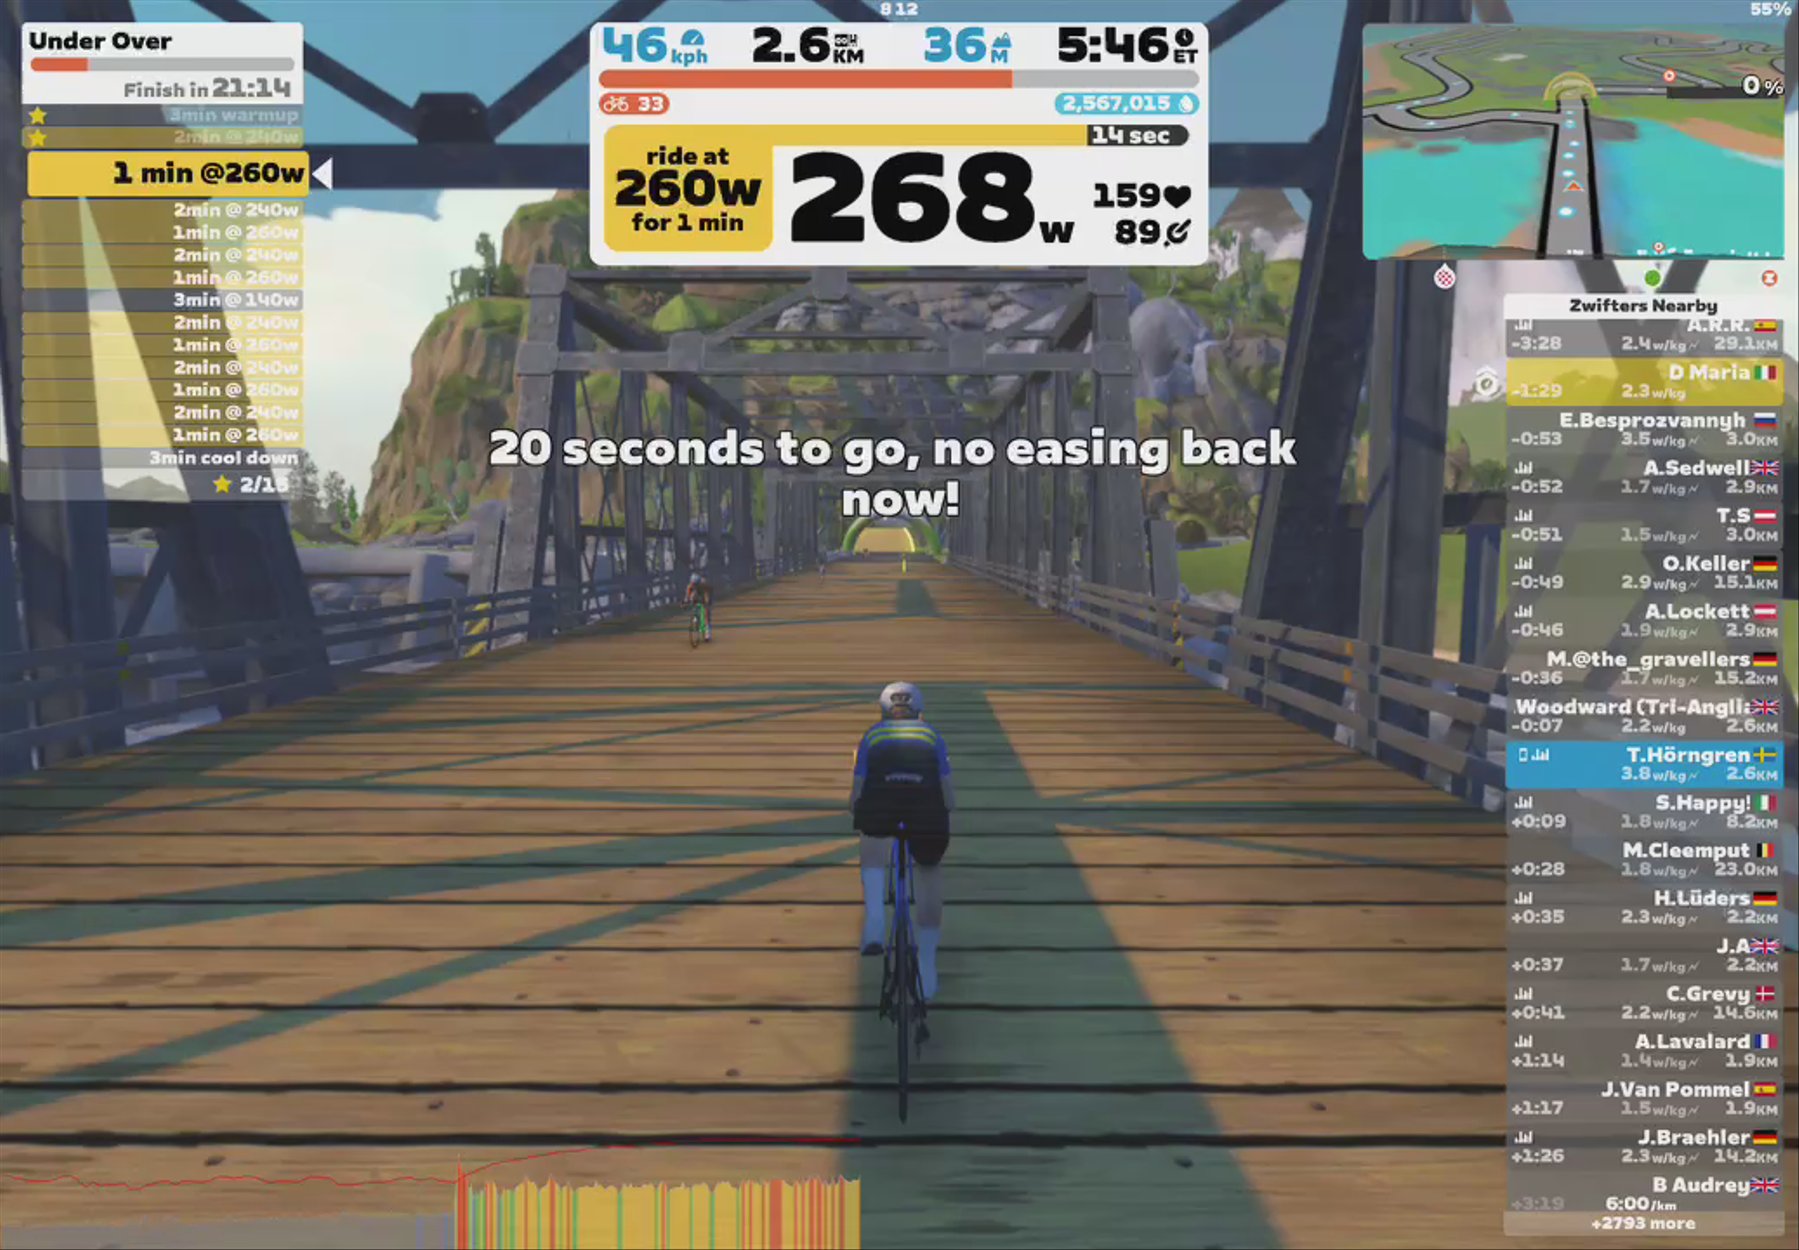 Zwift - Le Col - Training With Legends - Kristin Armstrong - Under Over in Watopia